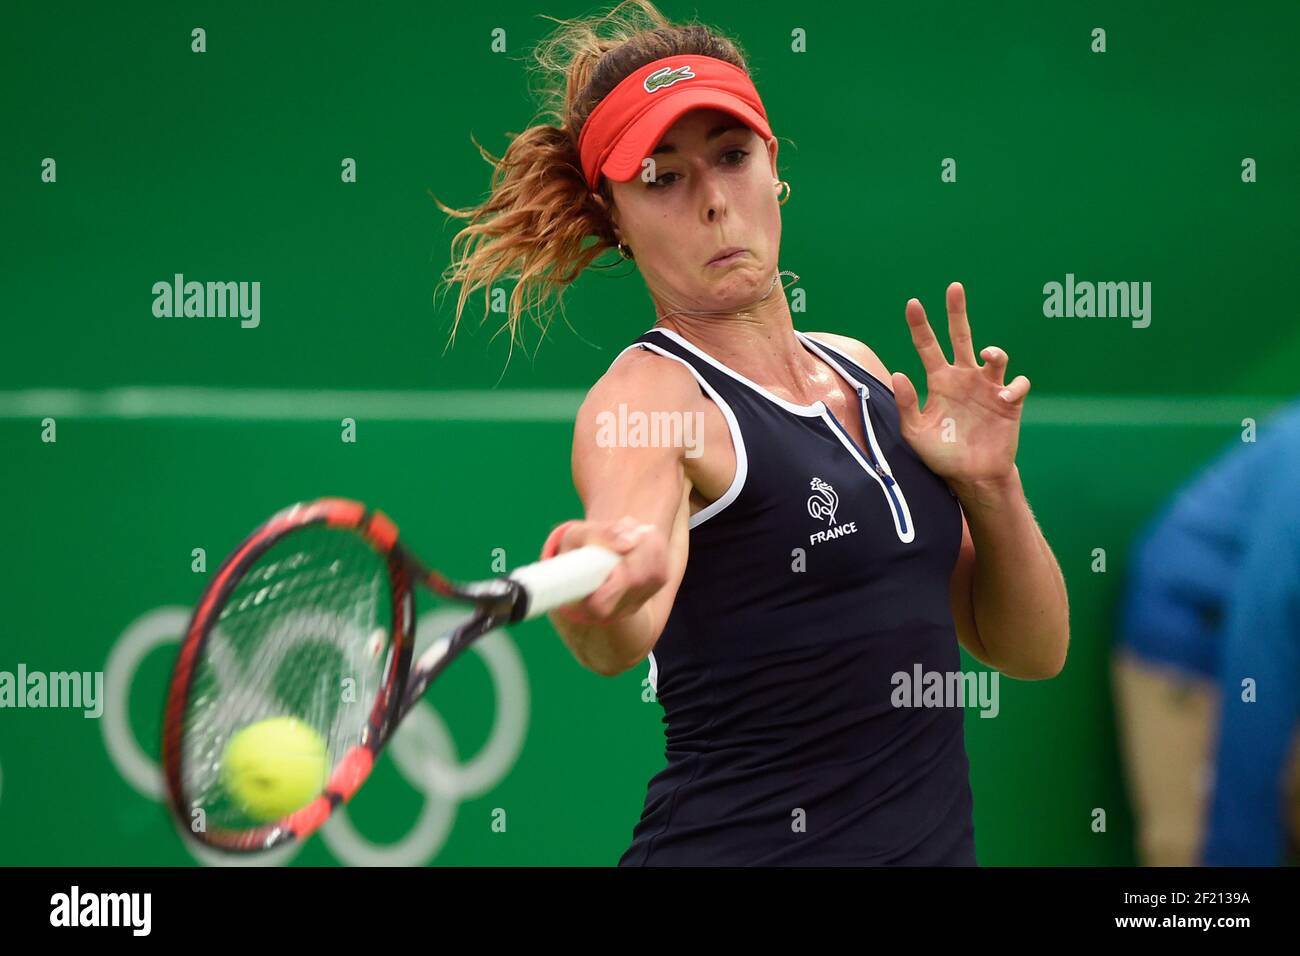 France's Alize Cornet in action during her Tennis Women's Single match  against Johanna Larsson of Sweden during the Olympic Games RIO 2016, Tennis,  on August 7, 2016, in Rio, Brazil - Photo